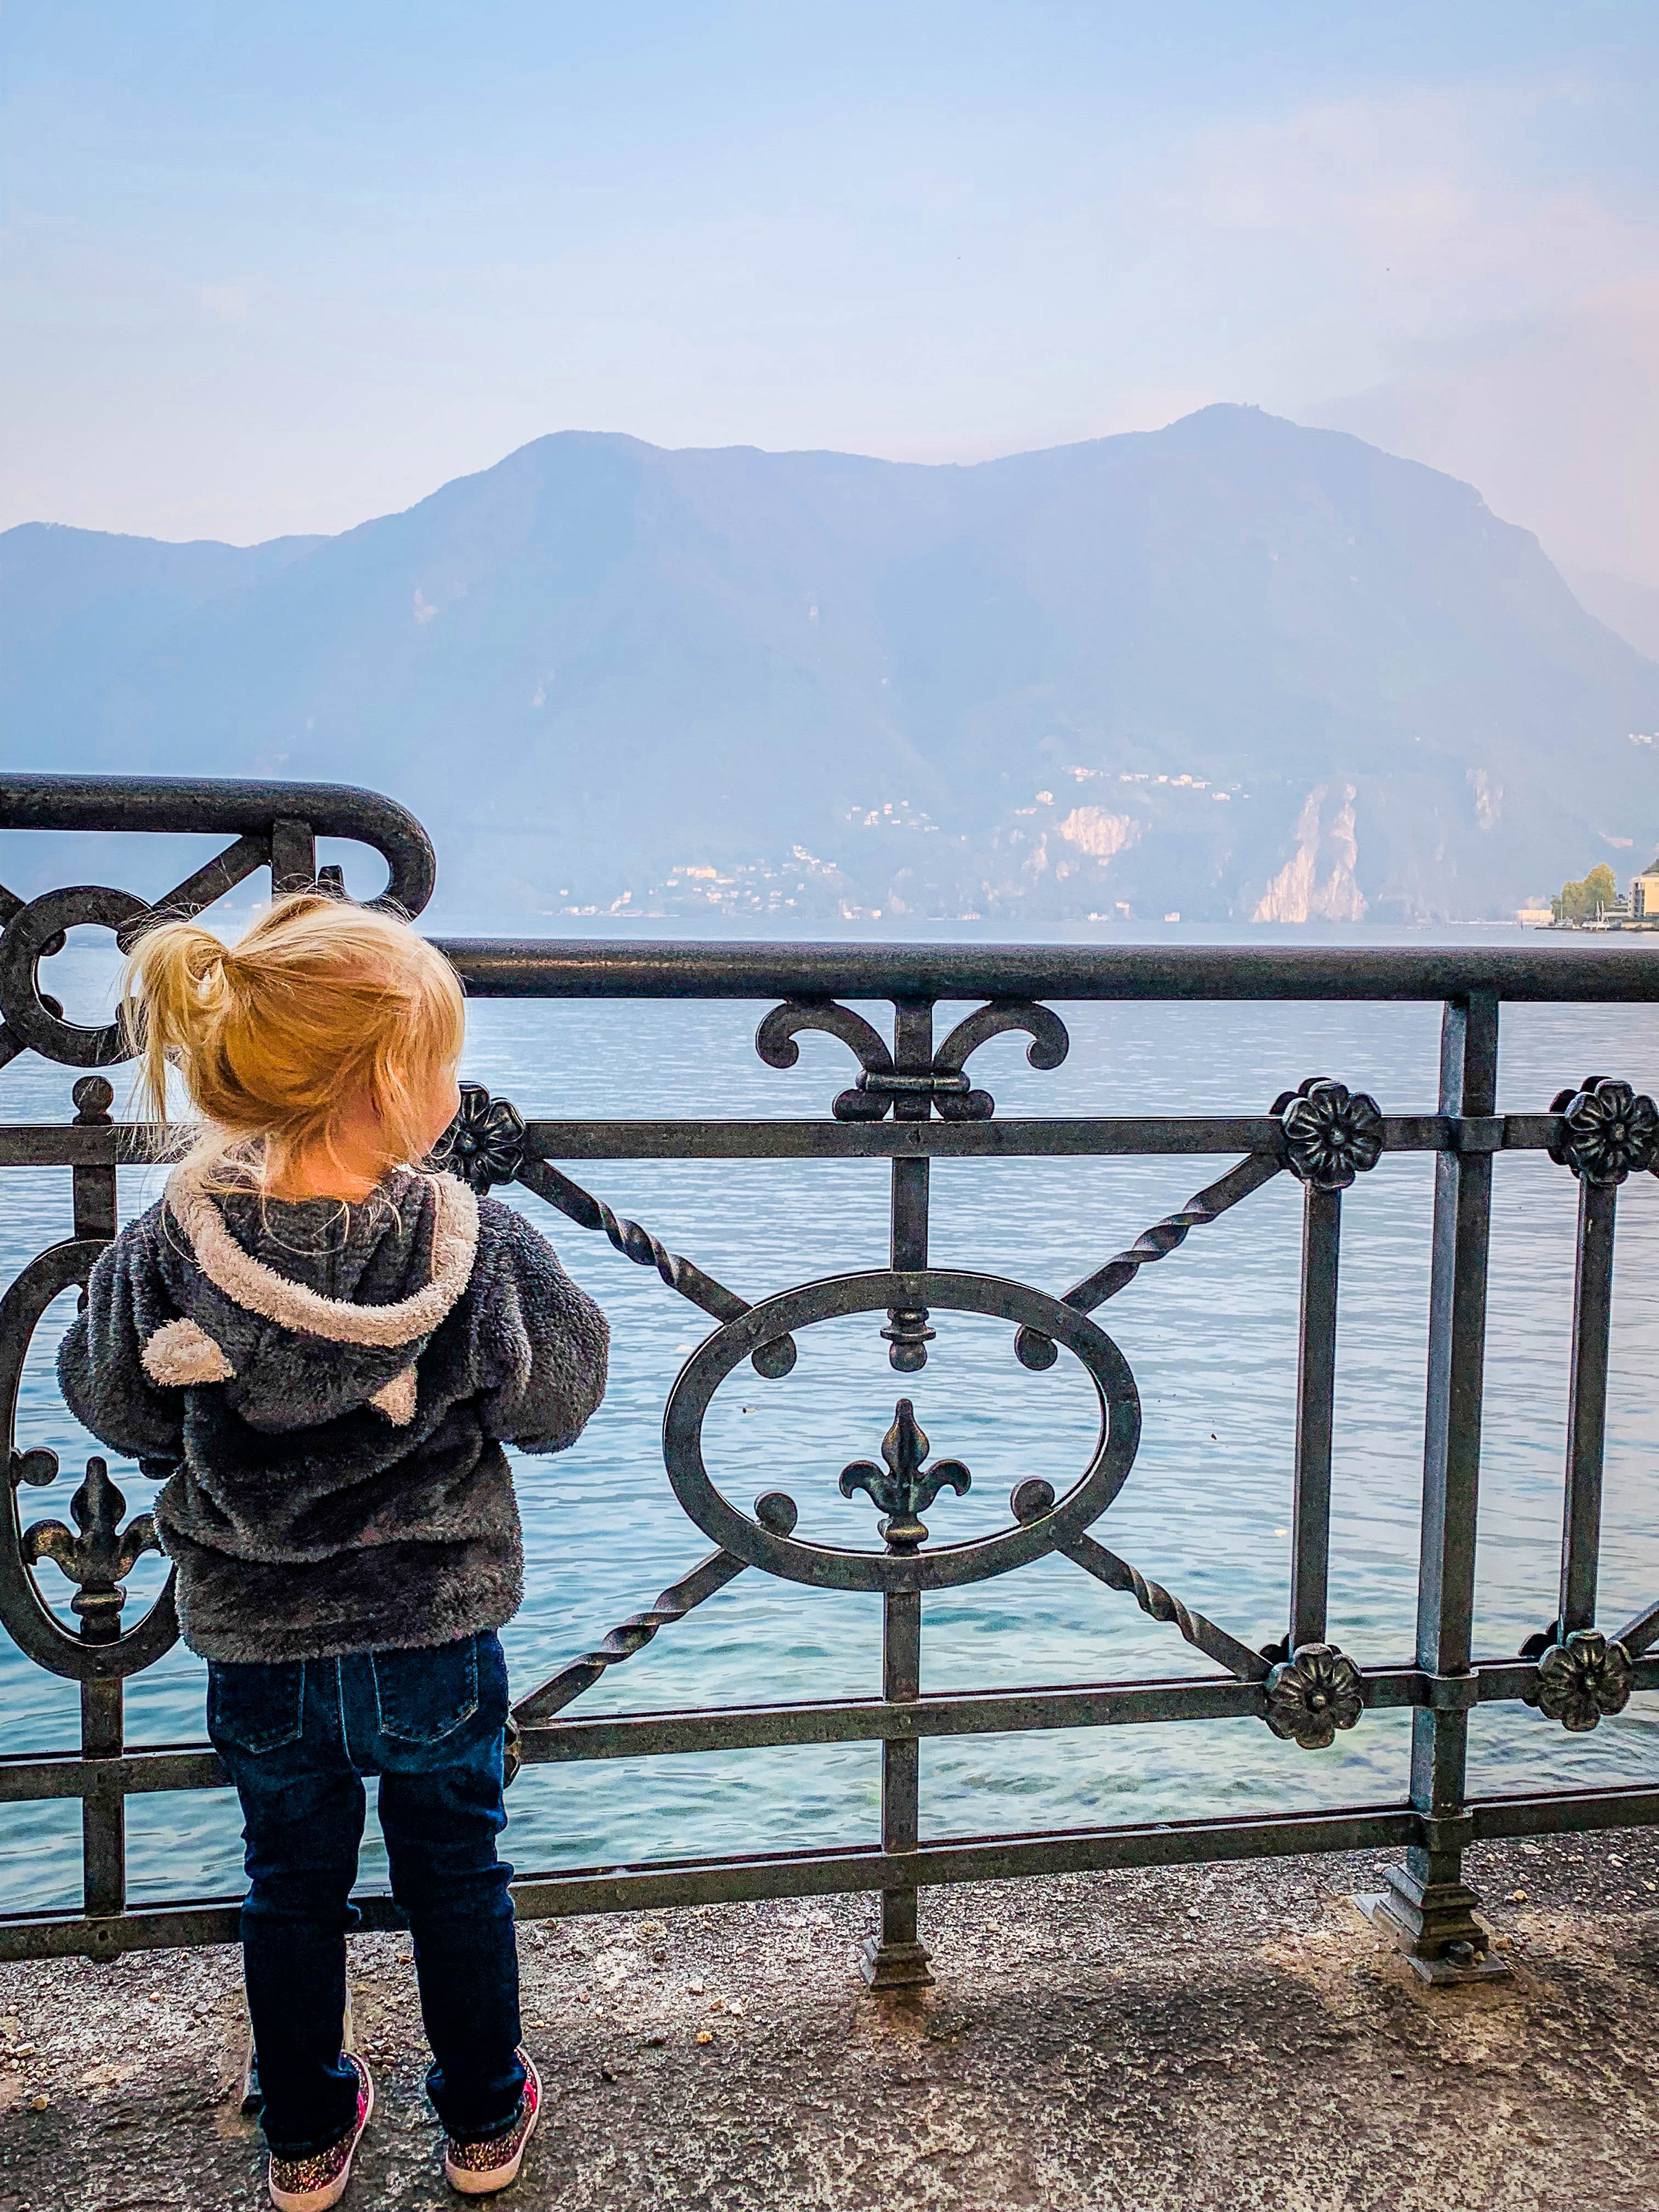 Headed to Lugano Switzerland? Popular Atlanta Blogger Happily Hughes is sharing where to eat, stay and do in her Family Travel Guide to Lugano Switzerland here!